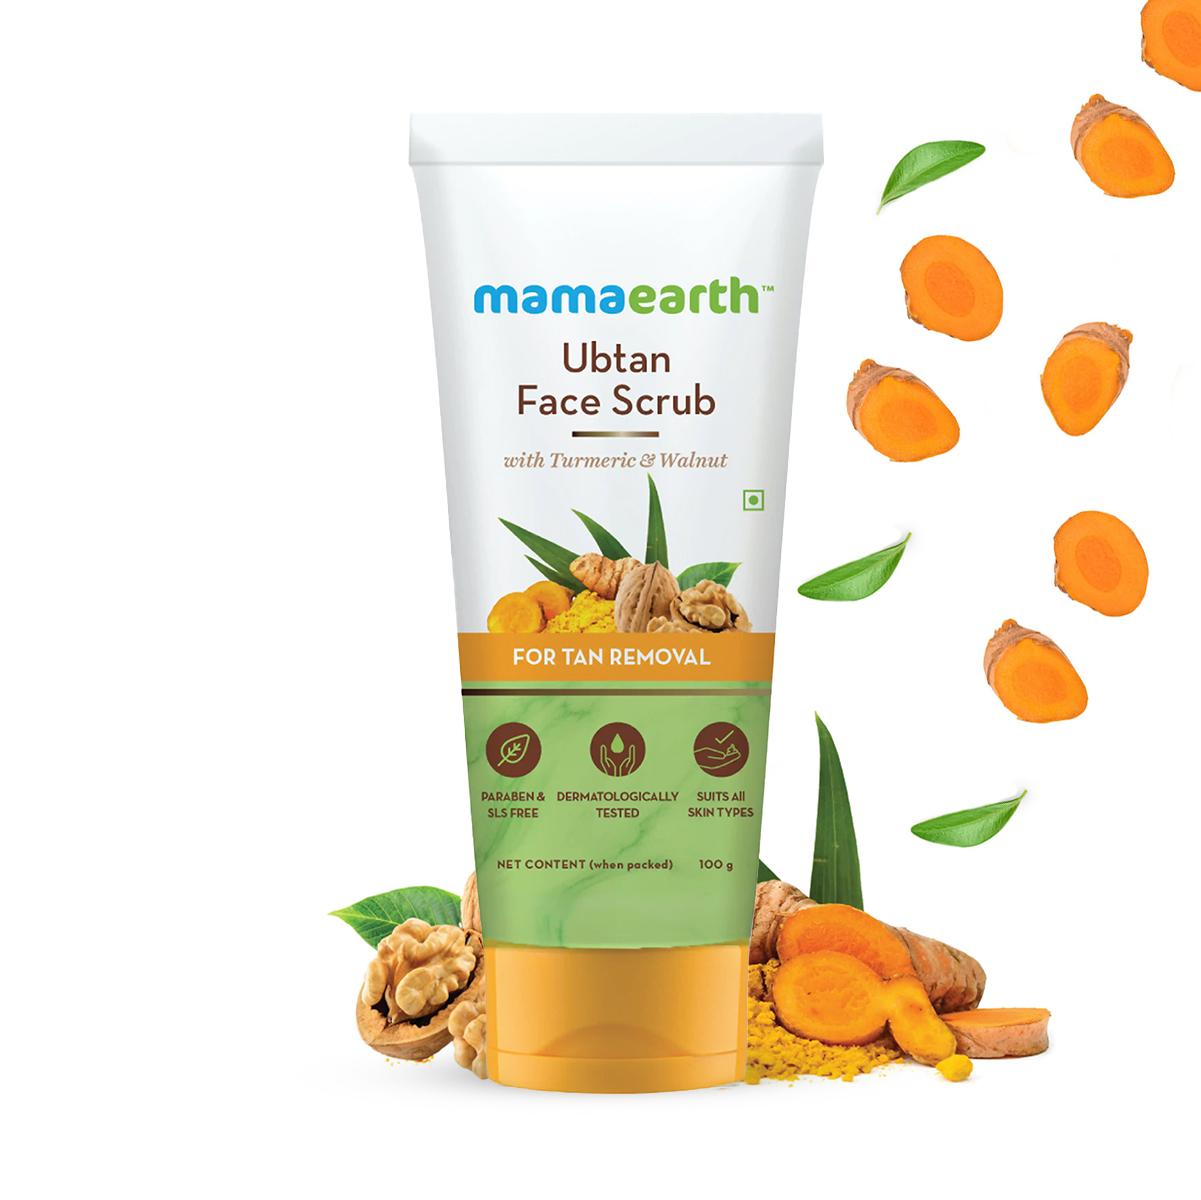 ubtan face scrub with turmeric and walnut for tan removal - 100g